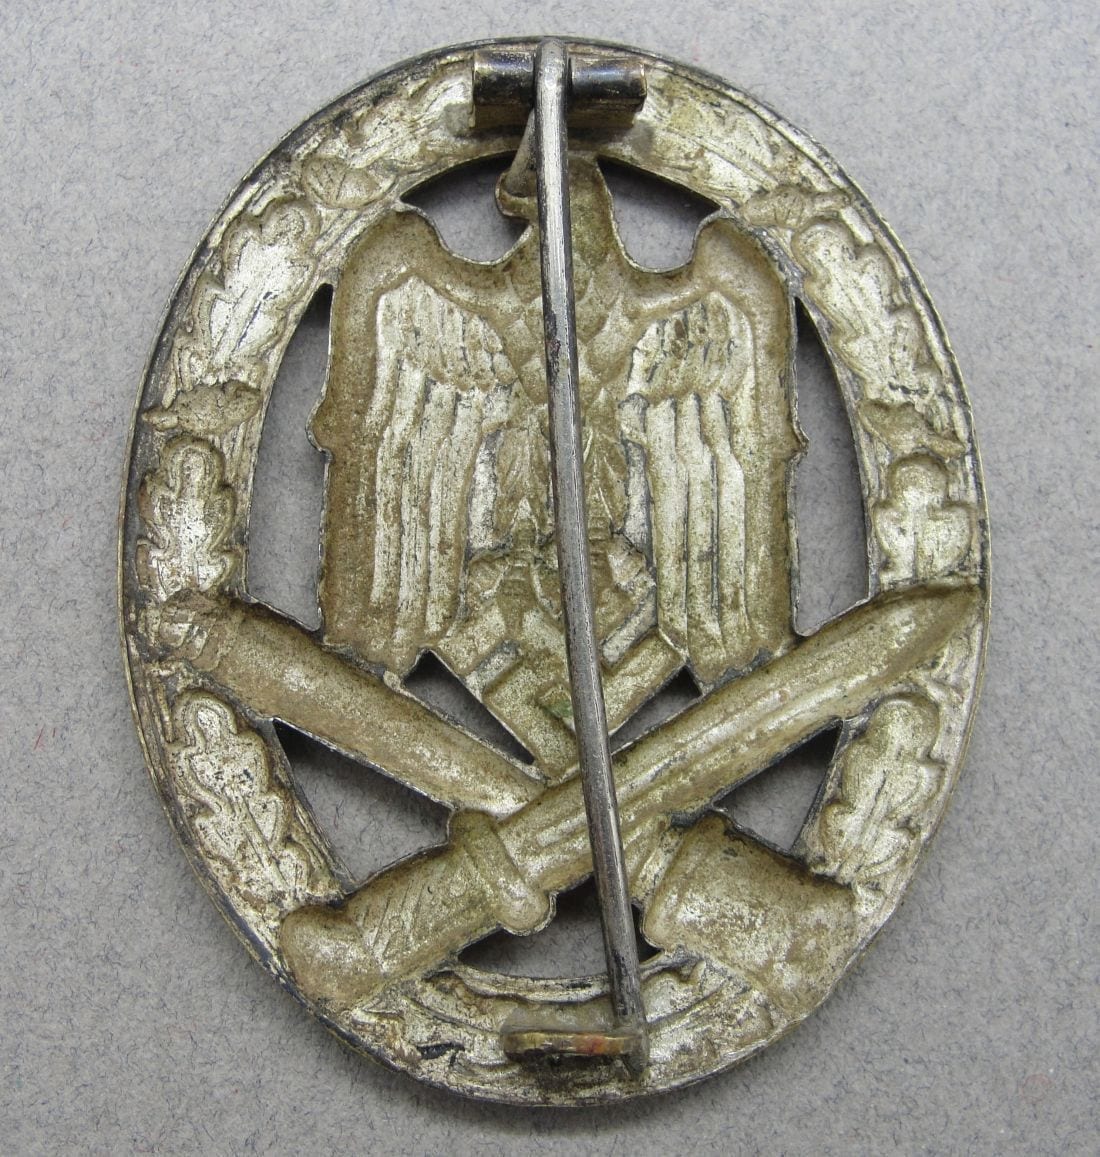 Army/Waffen-SS General Assault Badge - Early